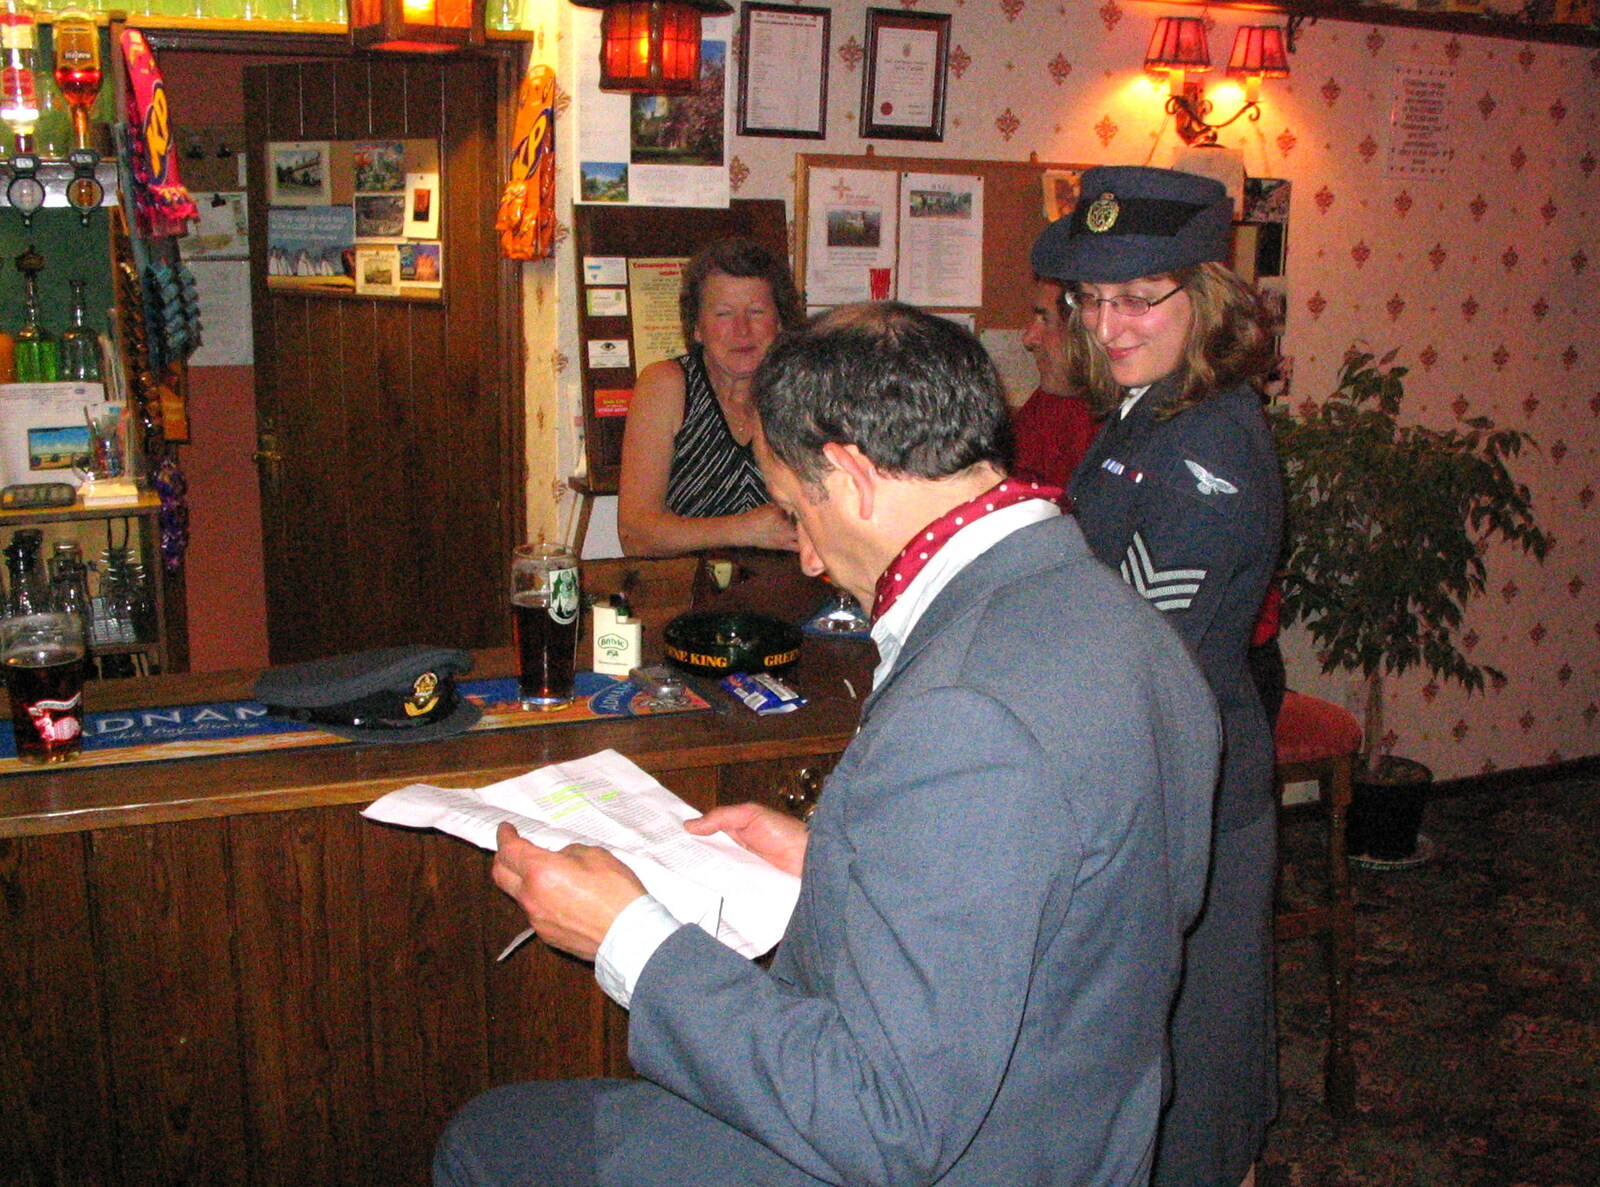 DH reads some paperwork from A 1940s VE Dance At Debach Airfield, Debach, Suffolk - 11th June 2005